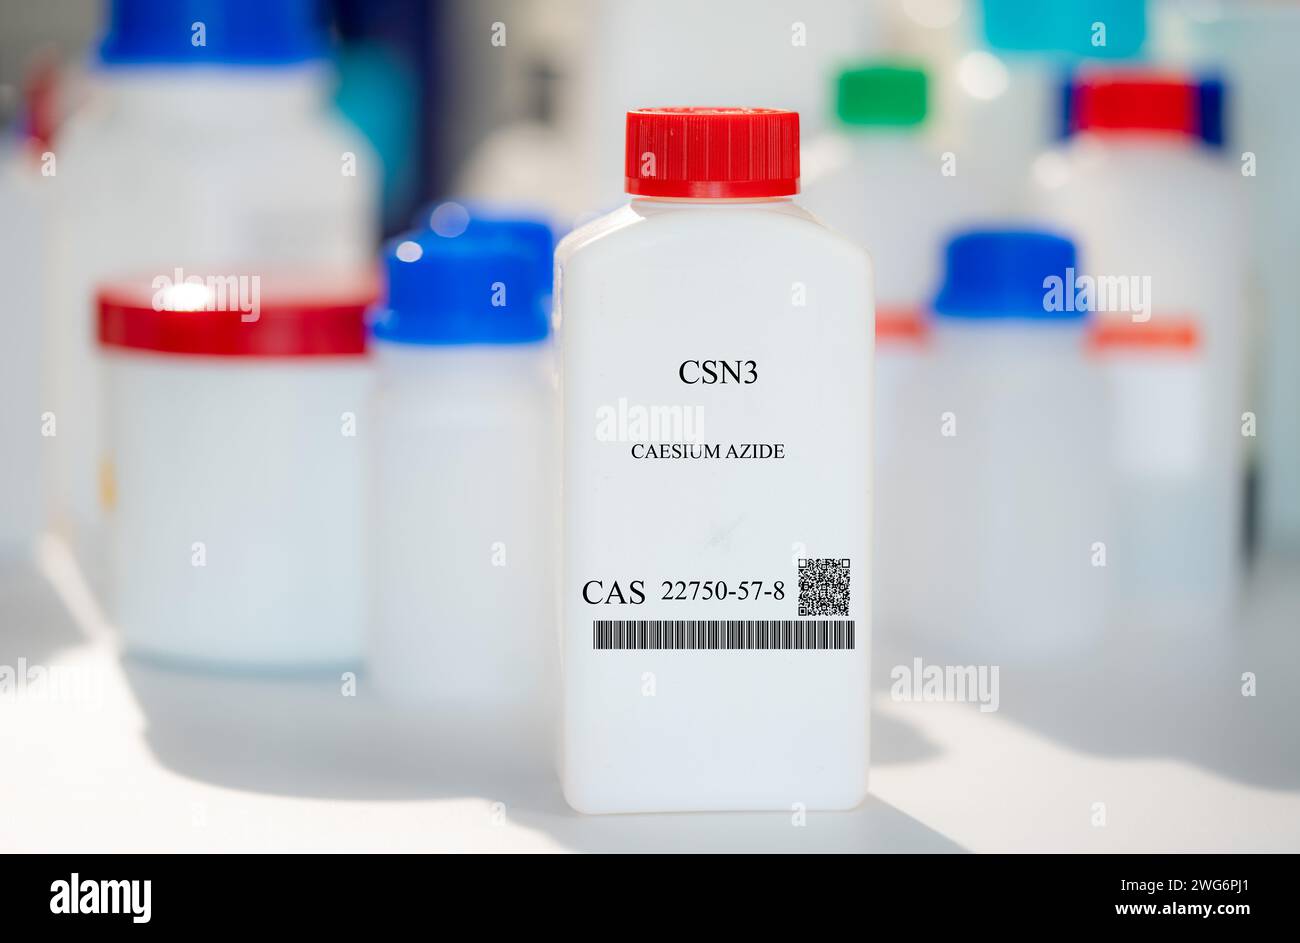 CsN3 caesium azide CAS 22750-57-8 chemical substance in white plastic laboratory packaging Stock Photo